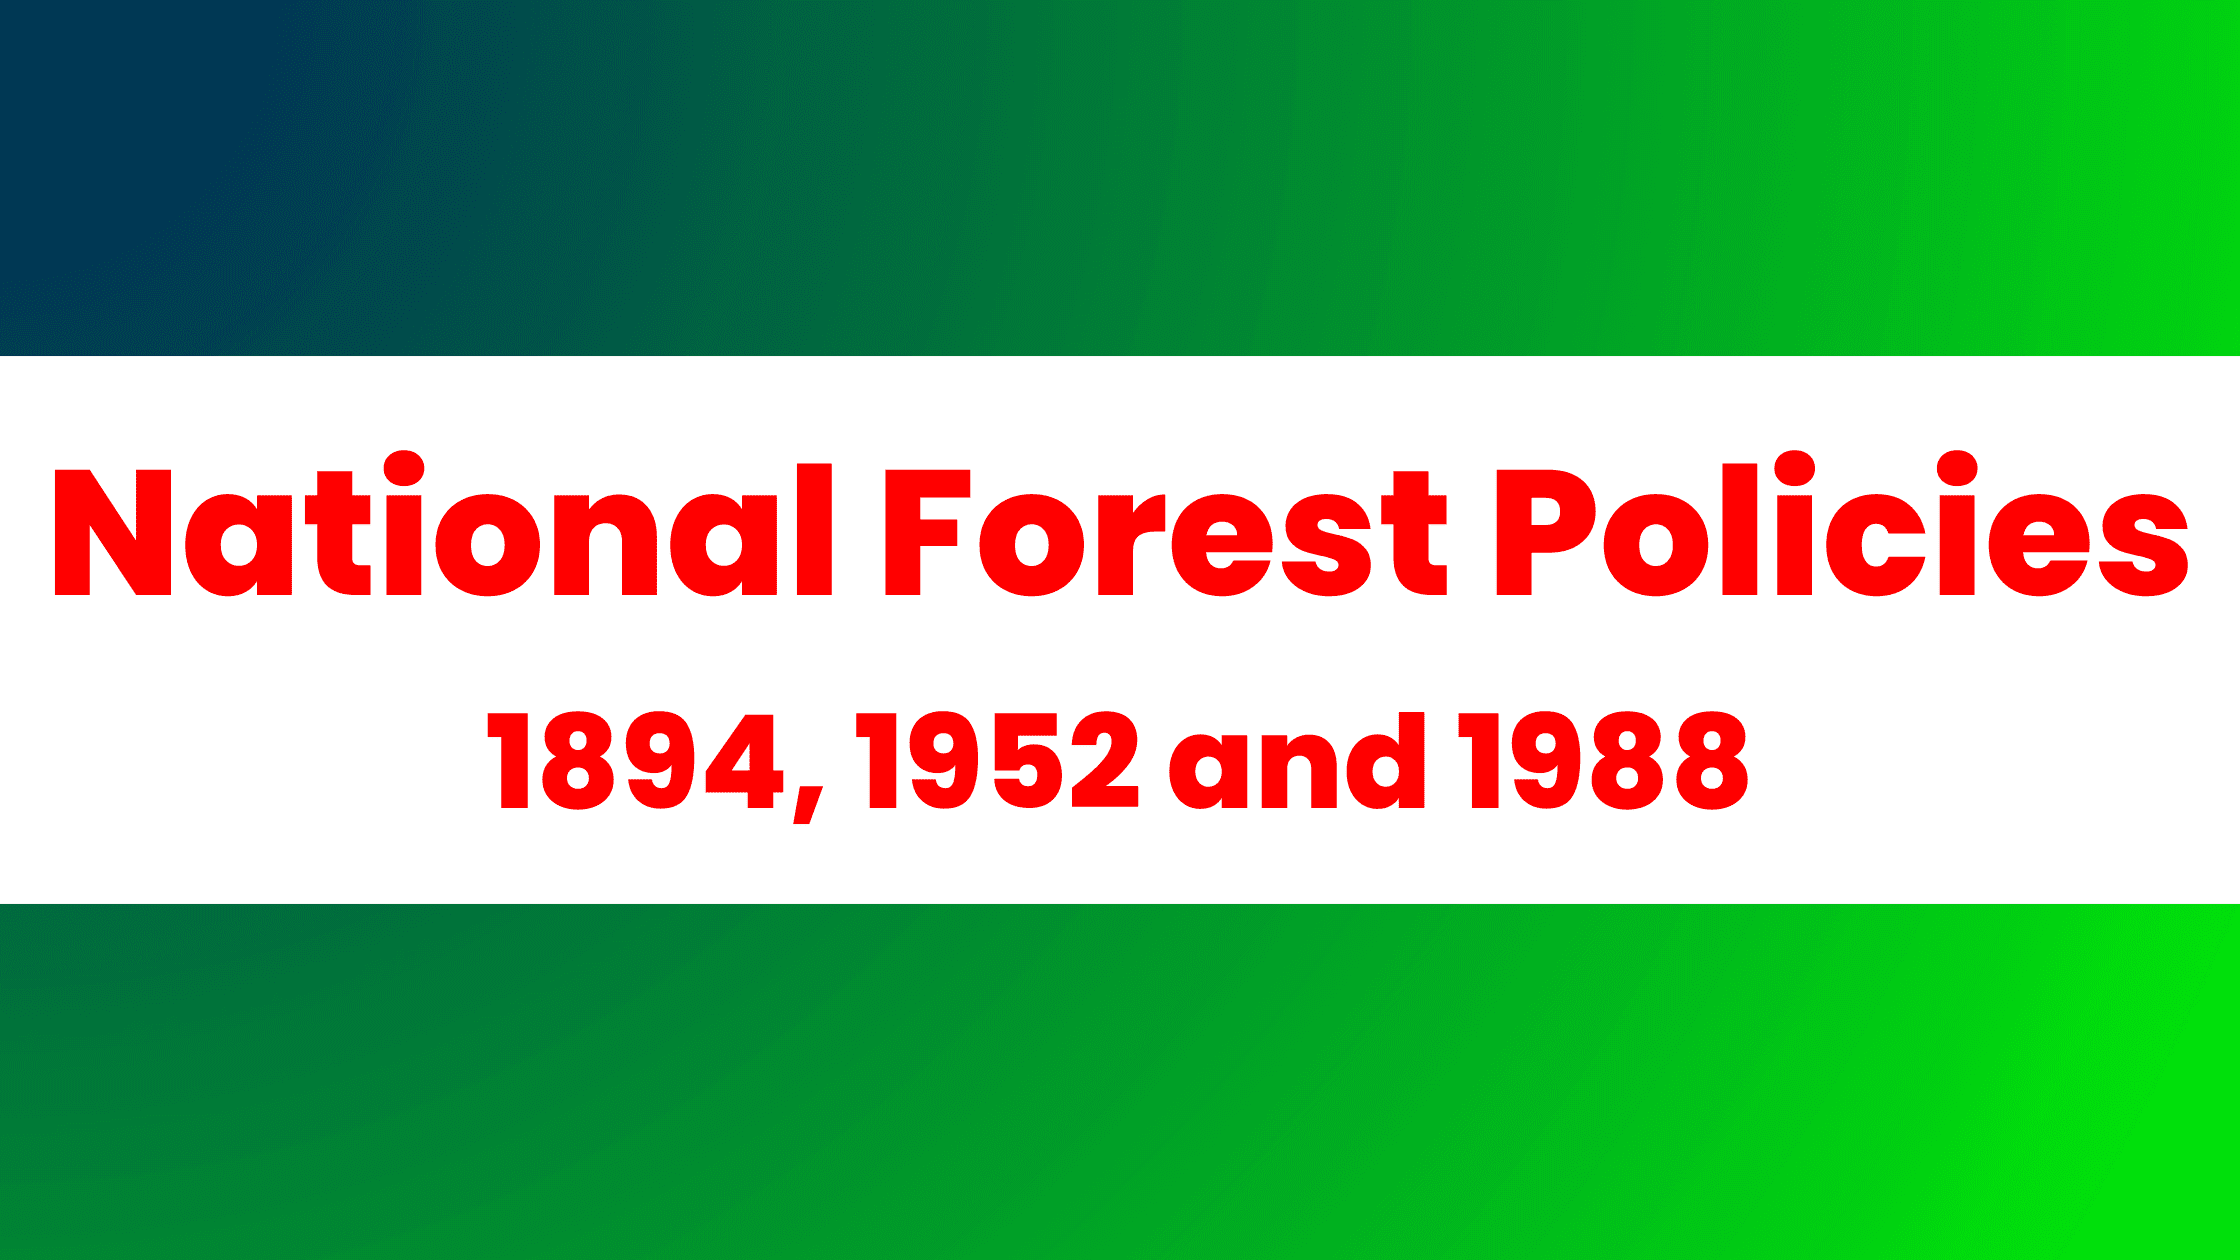 National Forest Policy in India | 1894, 1952 and 1988